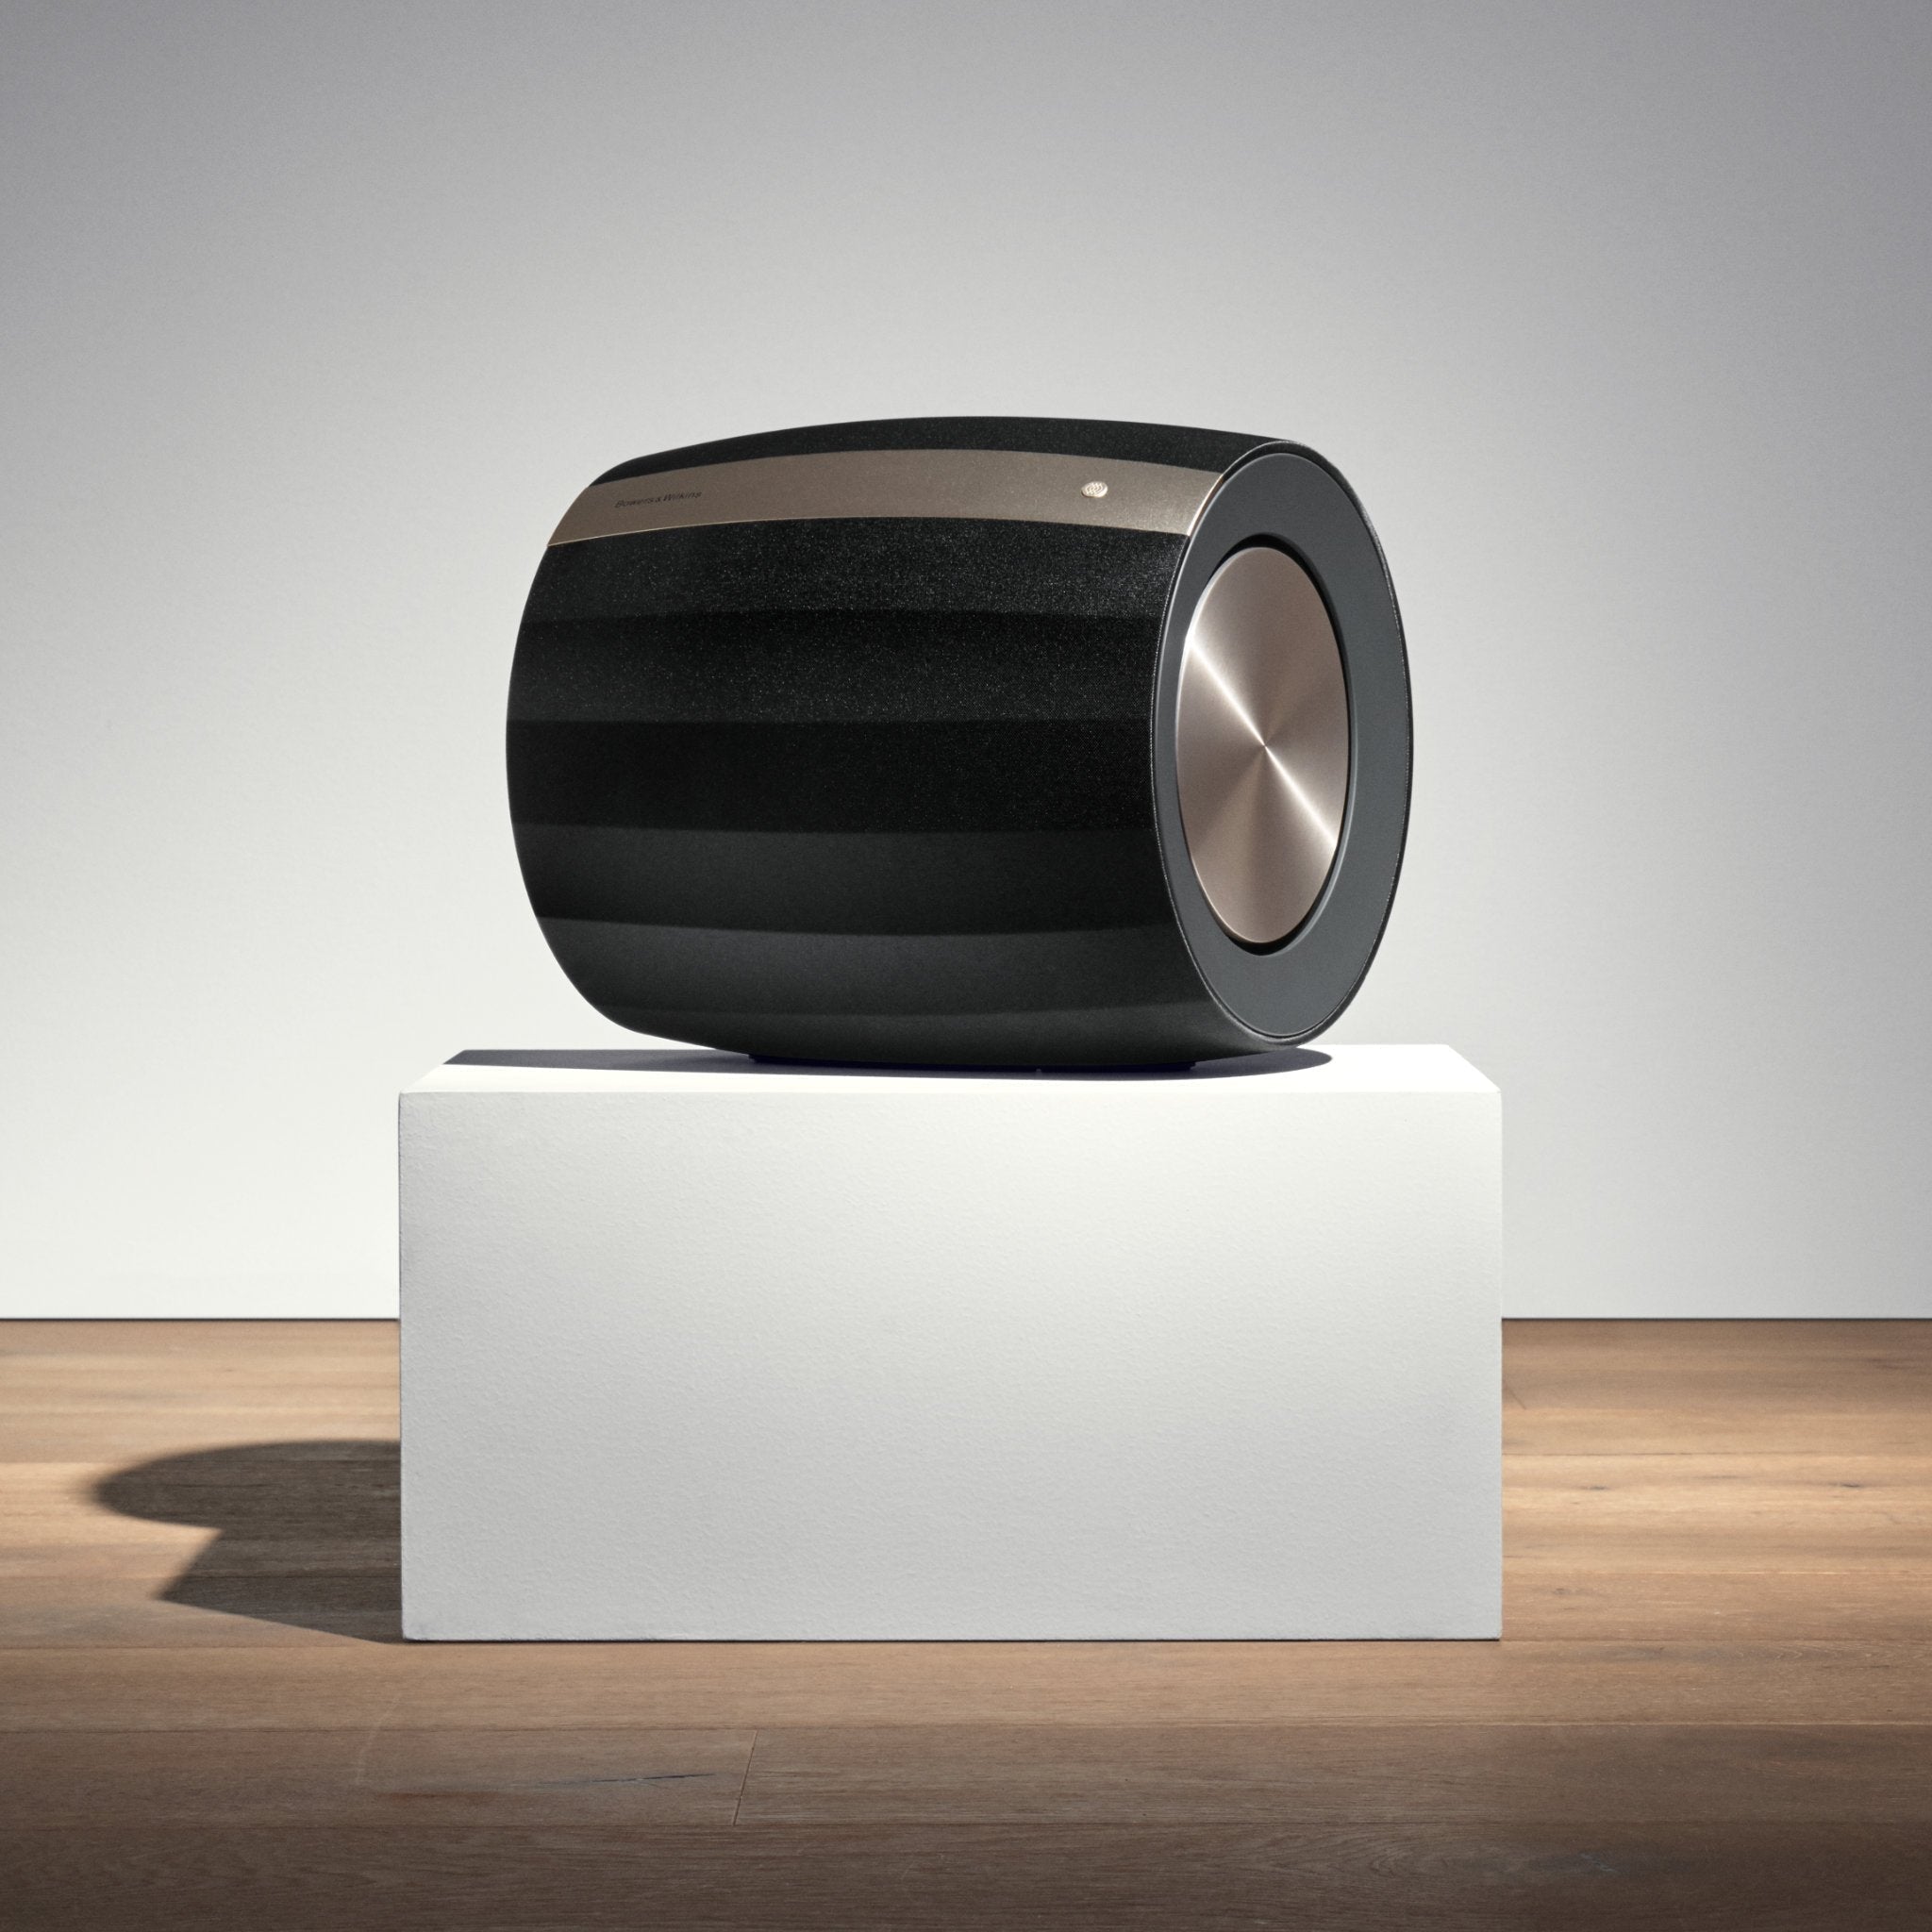 Bowers & Wilkins - Formation Bass - Subwoofer Australia